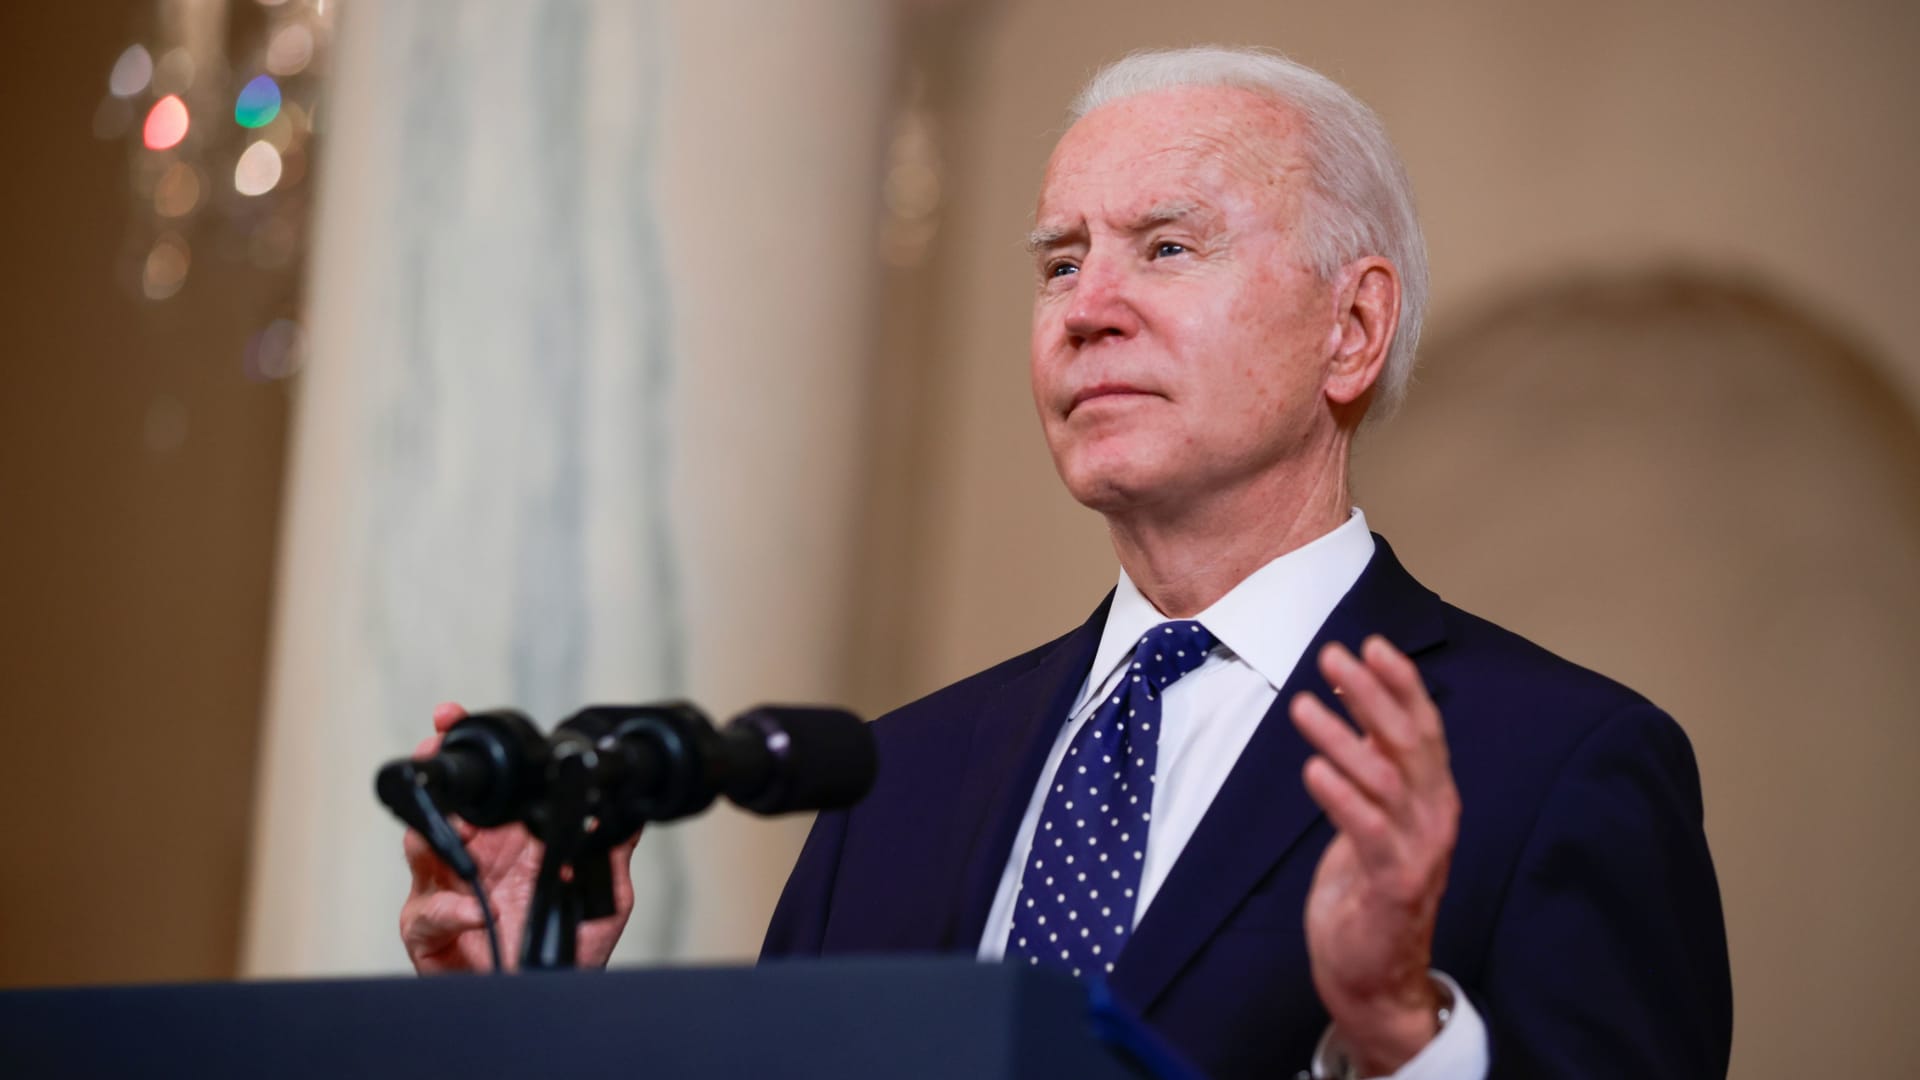 U.S. President Joe Biden speaks after a jury reached guilty verdicts in the murder trial of former Minneapolis police officer Derek Chauvin stemming from George Floyd's deadly arrest, in the Cross Hall at the White House in Washington, U.S., April 20, 2021.